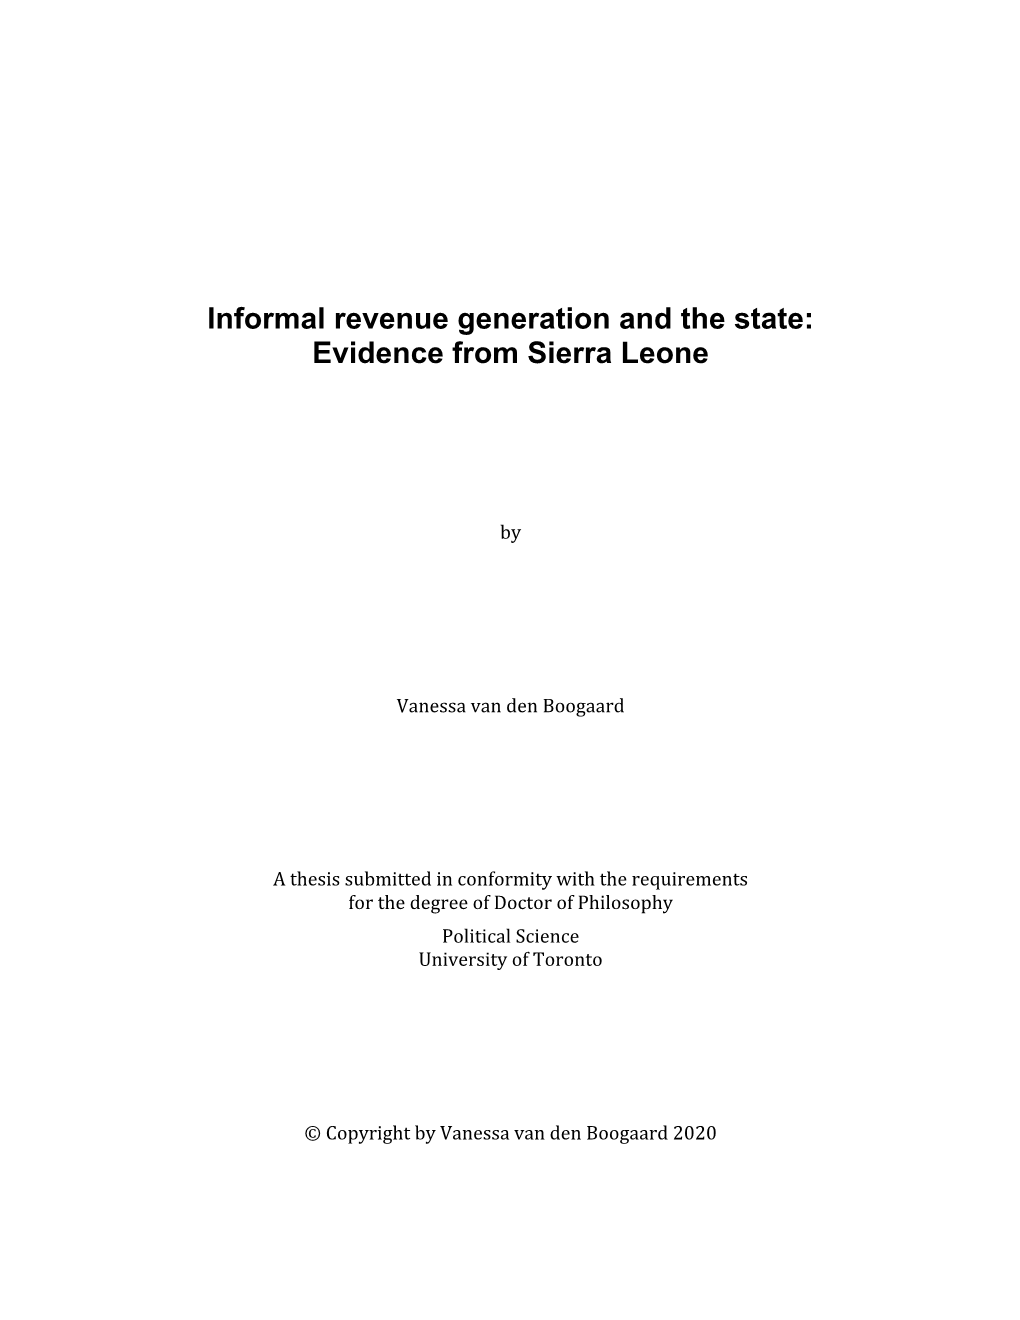 Informal Revenue Generation and the State: Evidence from Sierra Leone